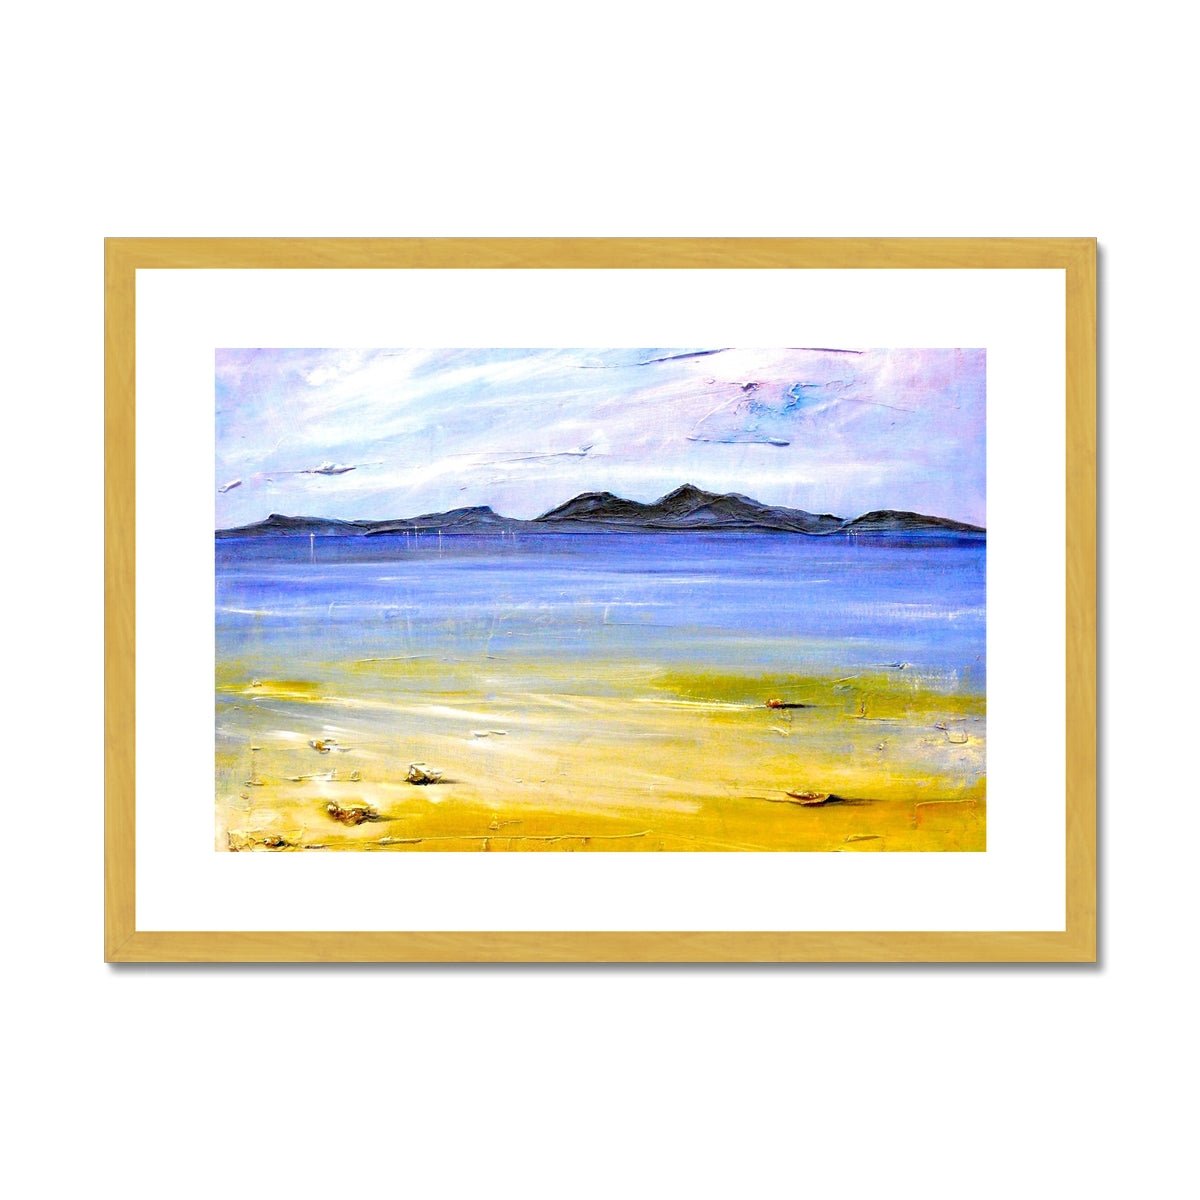 Camusdarach Beach Arisaig Painting | Antique Framed & Mounted Prints From Scotland-Antique Framed & Mounted Prints-Scottish Highlands & Lowlands Art Gallery-A2 Landscape-Gold Frame-Paintings, Prints, Homeware, Art Gifts From Scotland By Scottish Artist Kevin Hunter